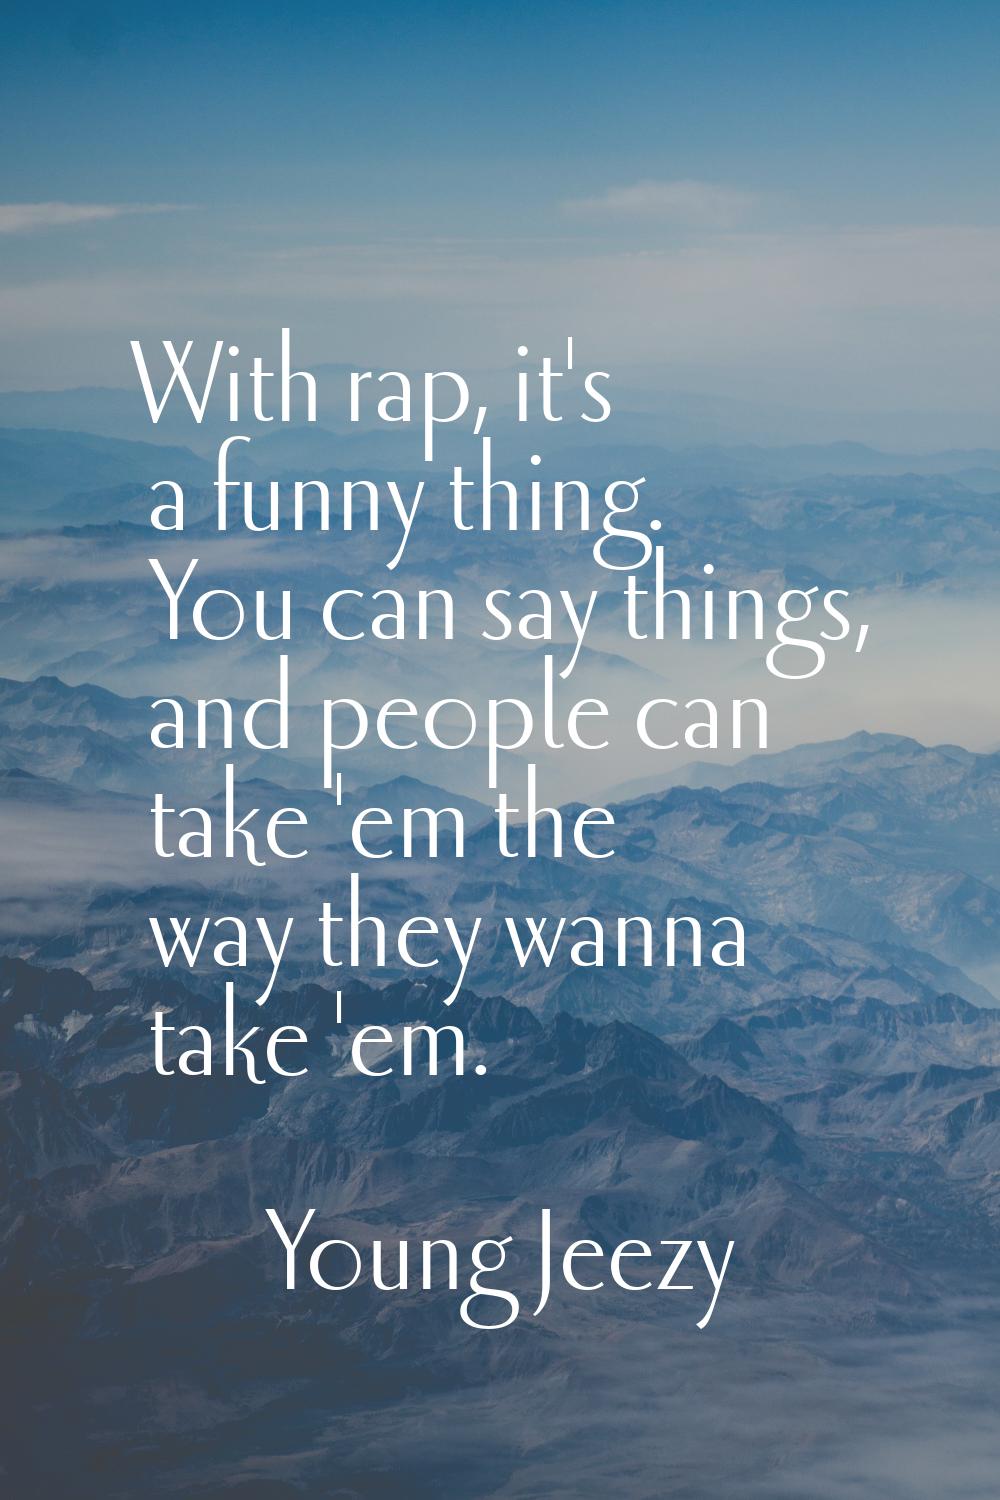 With rap, it's a funny thing. You can say things, and people can take 'em the way they wanna take '